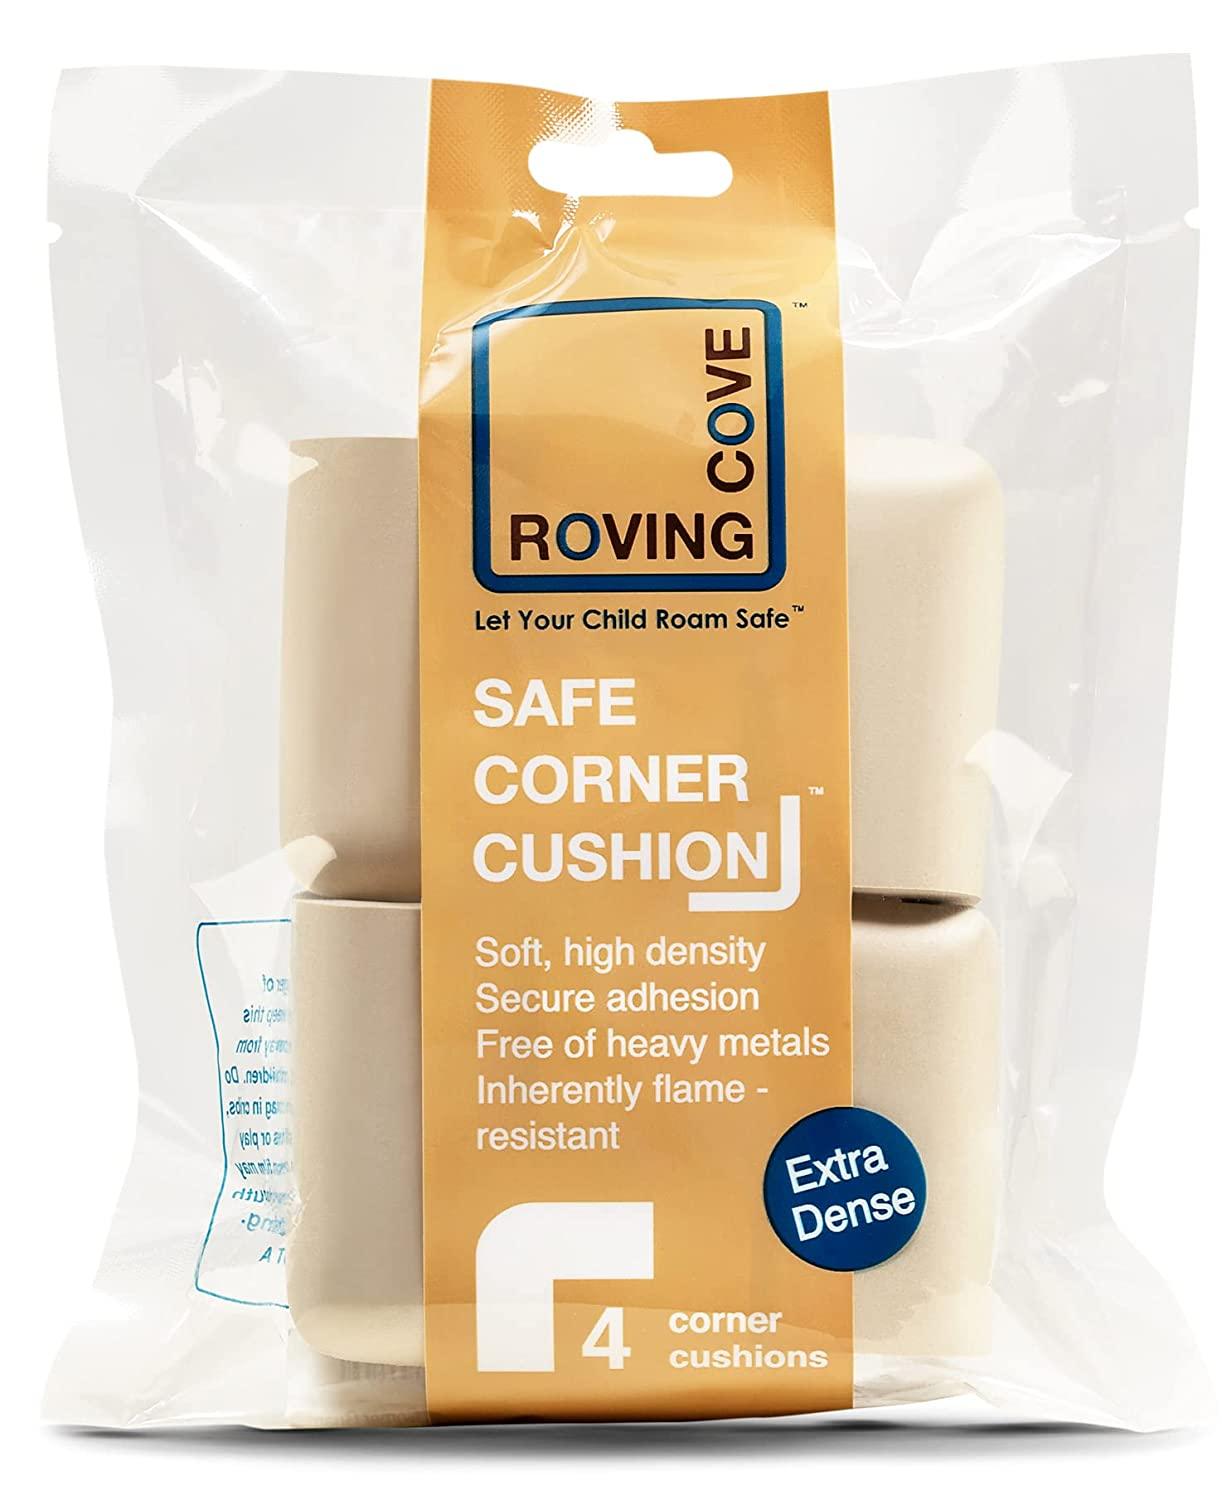 Roving Cove Corner Protector for Baby (4 Large Corners), Hefty-Fit  Heavy-Duty Soft Rubber Foam Furniture Corner Bumper Guards, 3M Adhesive  Pre-Taped